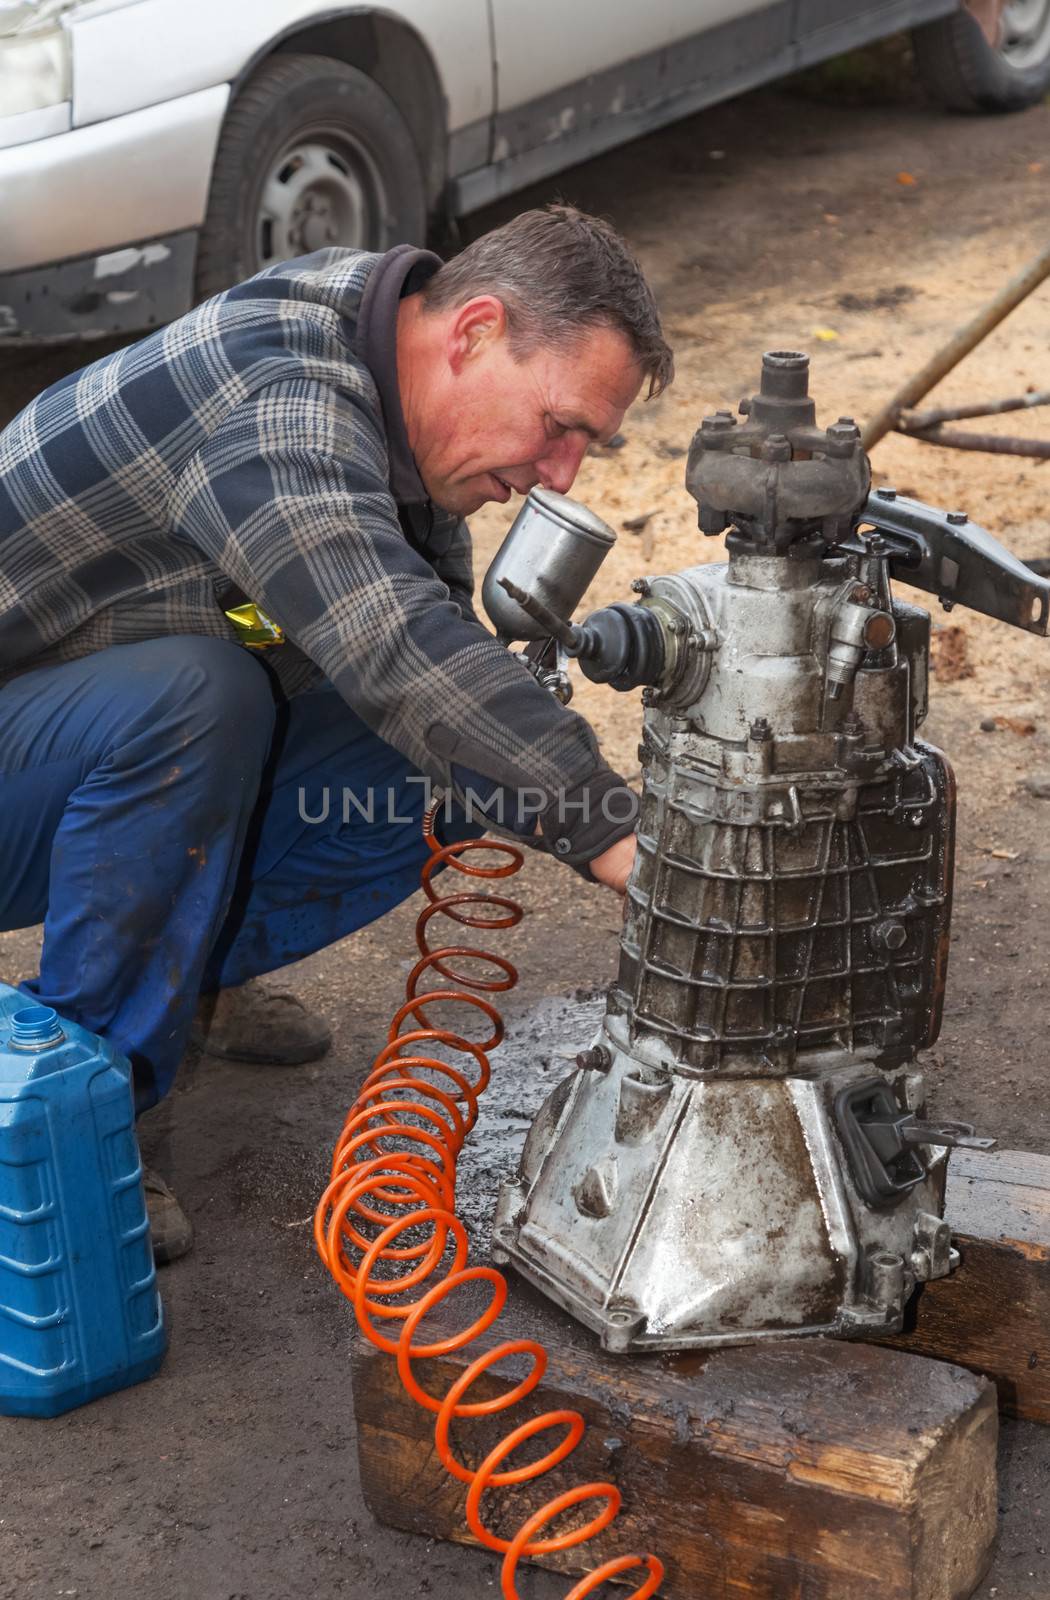 A man cleans the gearbox taken from the car for overhaul , without the help of professionals